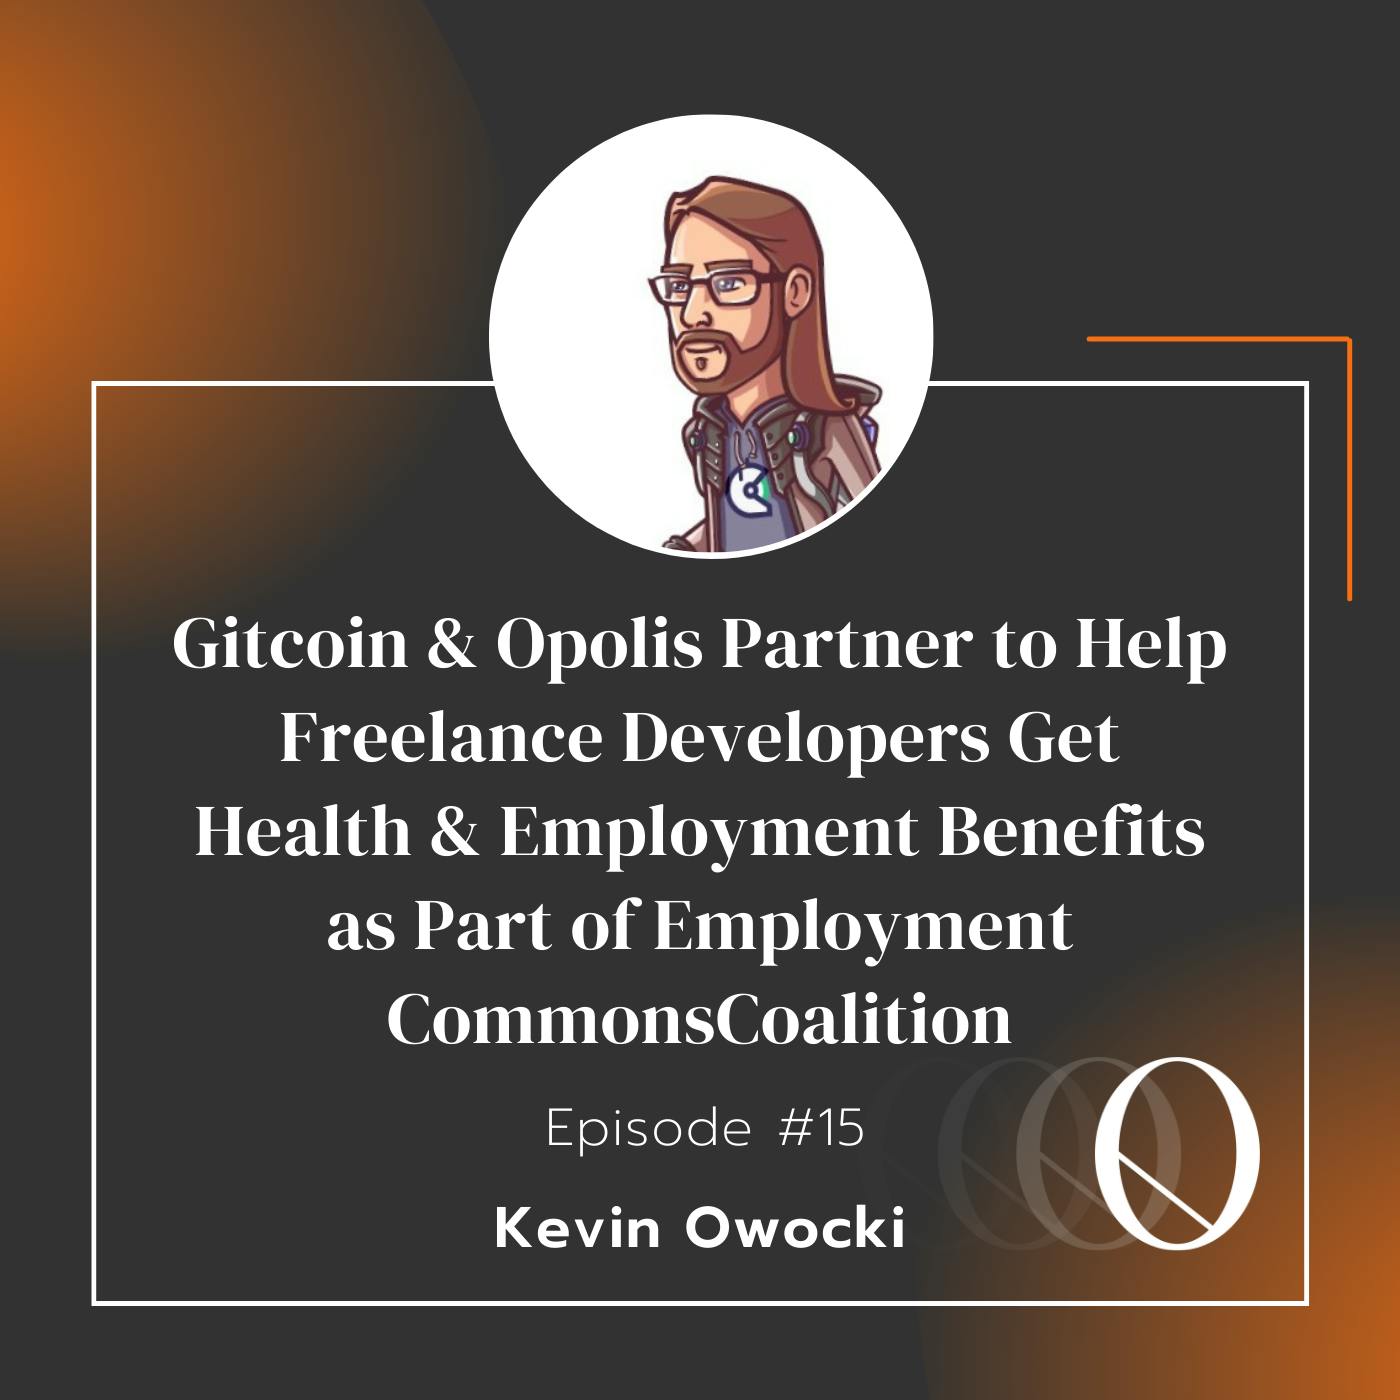 Episode 15: Gitcoin & Opolis Partner to Help Freelance Developers Get Health & Employment Benefits as Part of Employment Commons Coalition